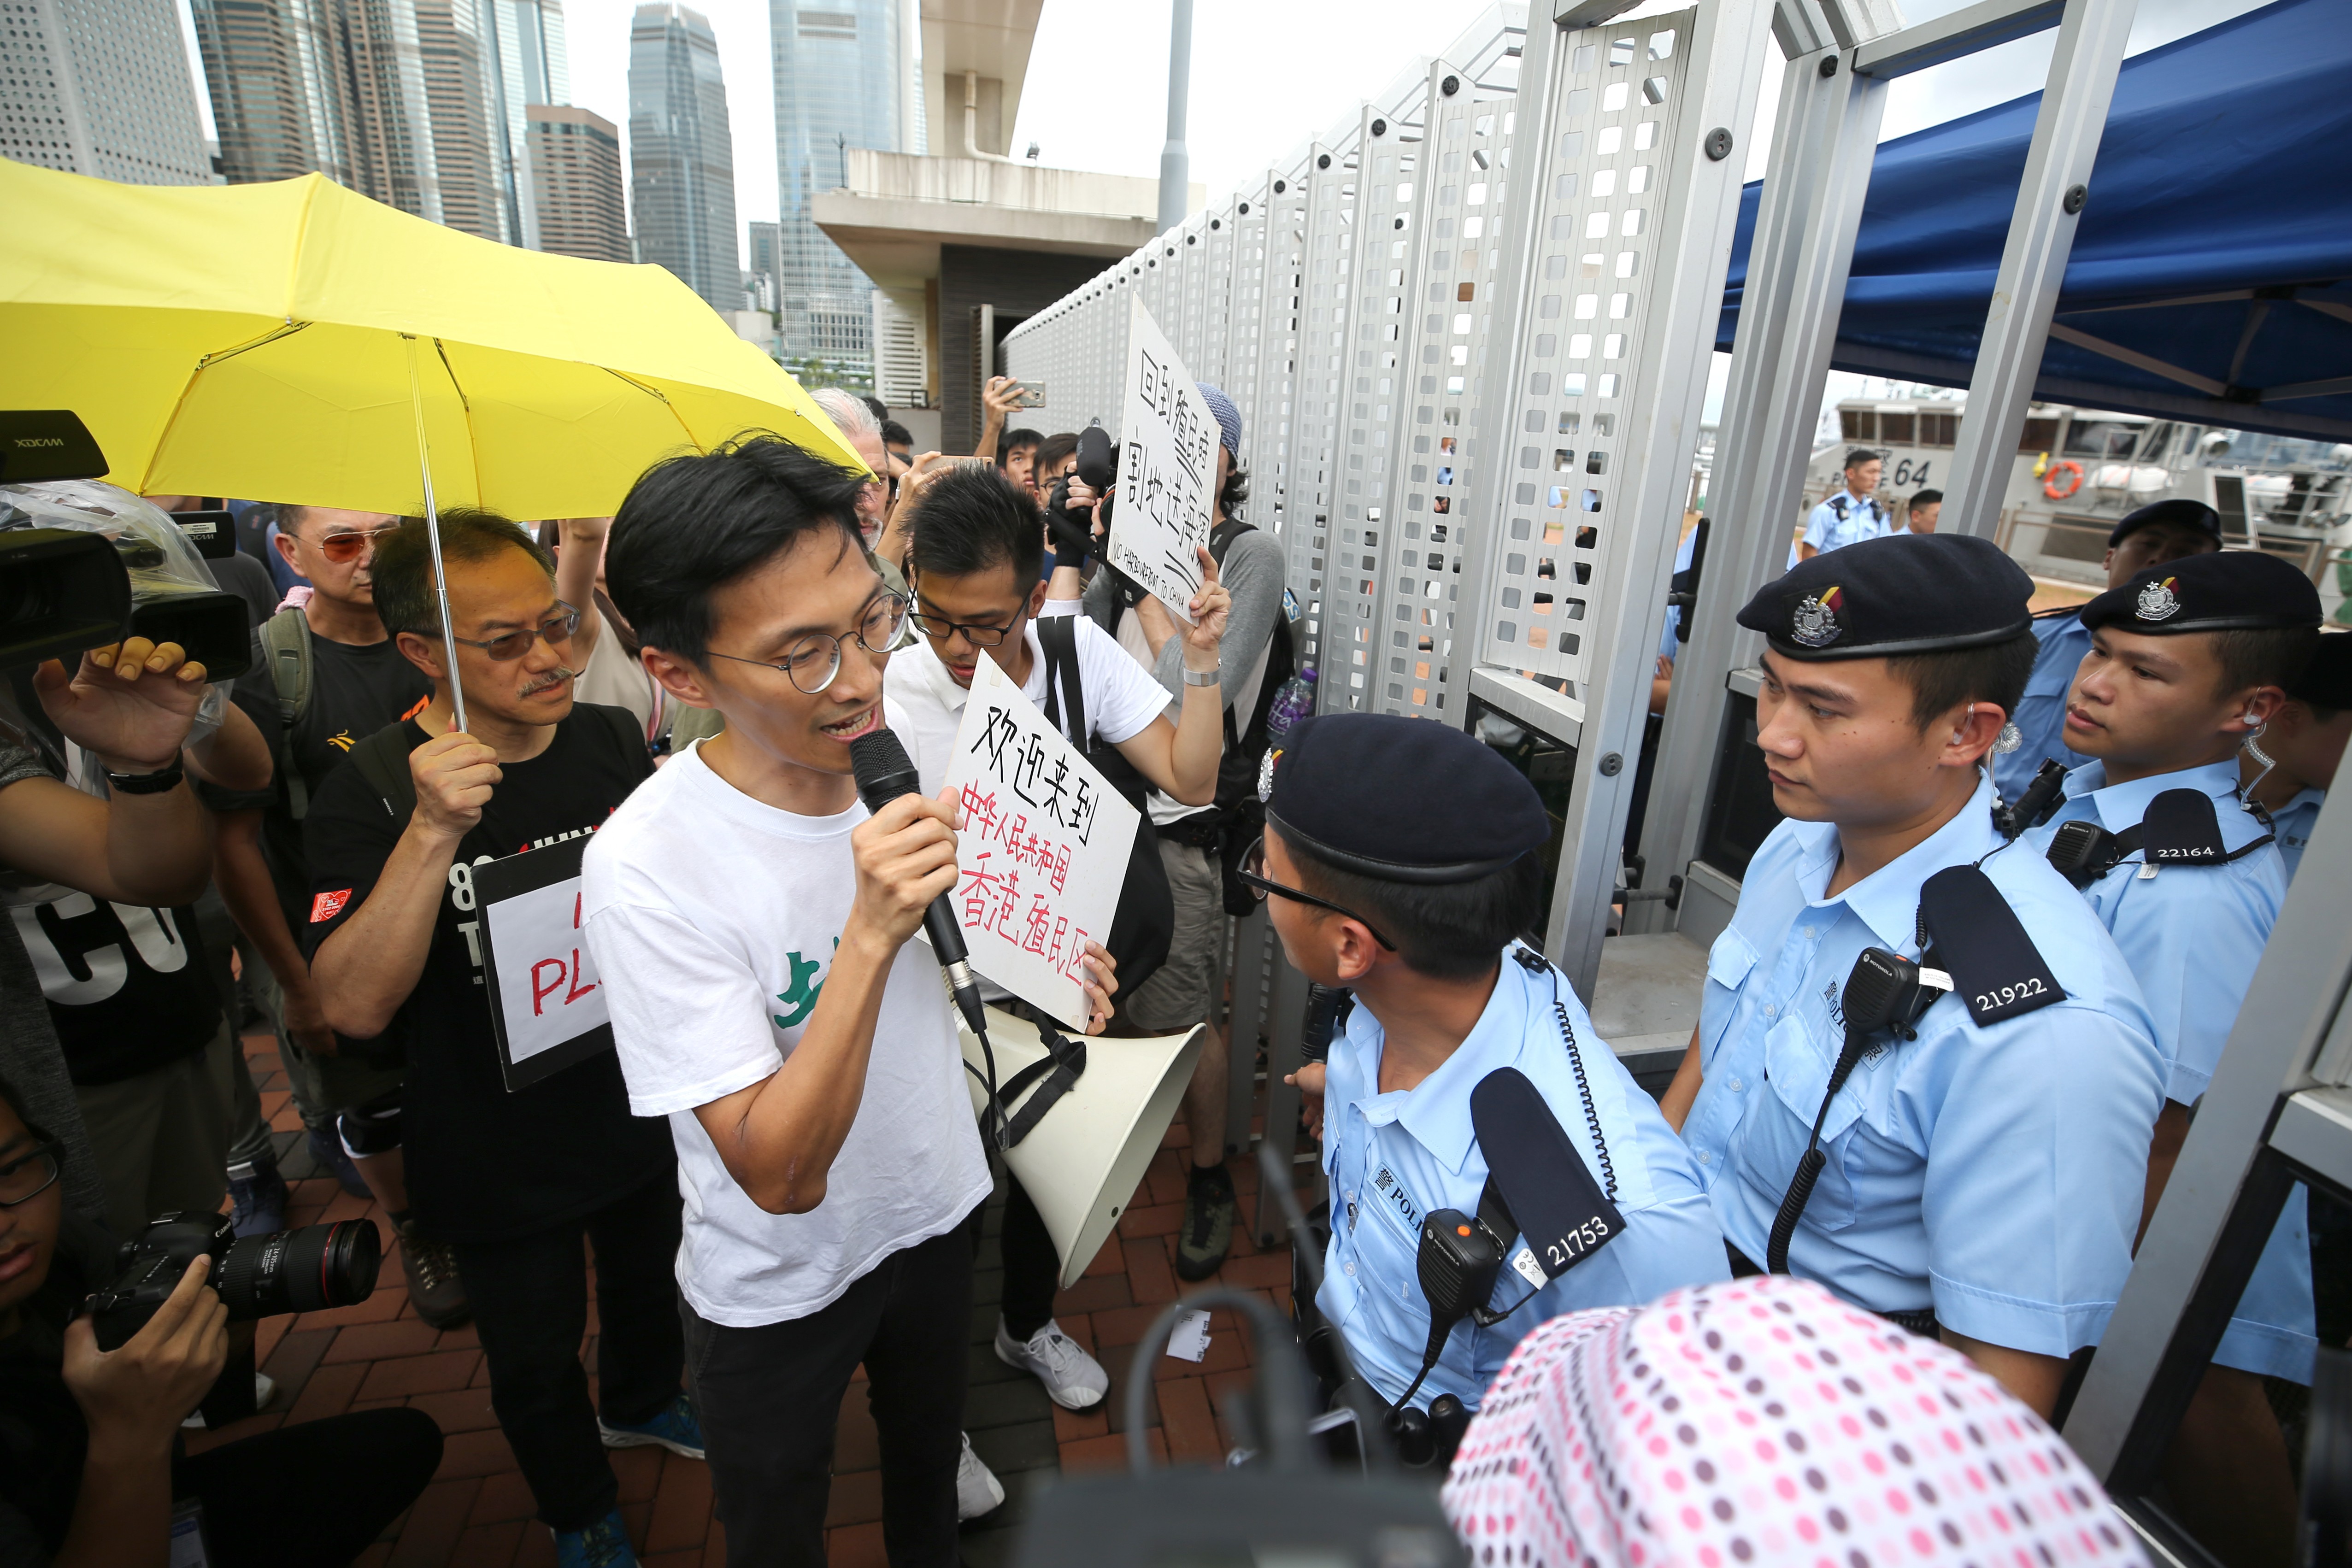 Lawmakers Eddie Chu (front), and Fernando Cheung, along with members from the Protect the Harbourfront Alliance concern group try to enter the PLA site. Photo: Winson Wong